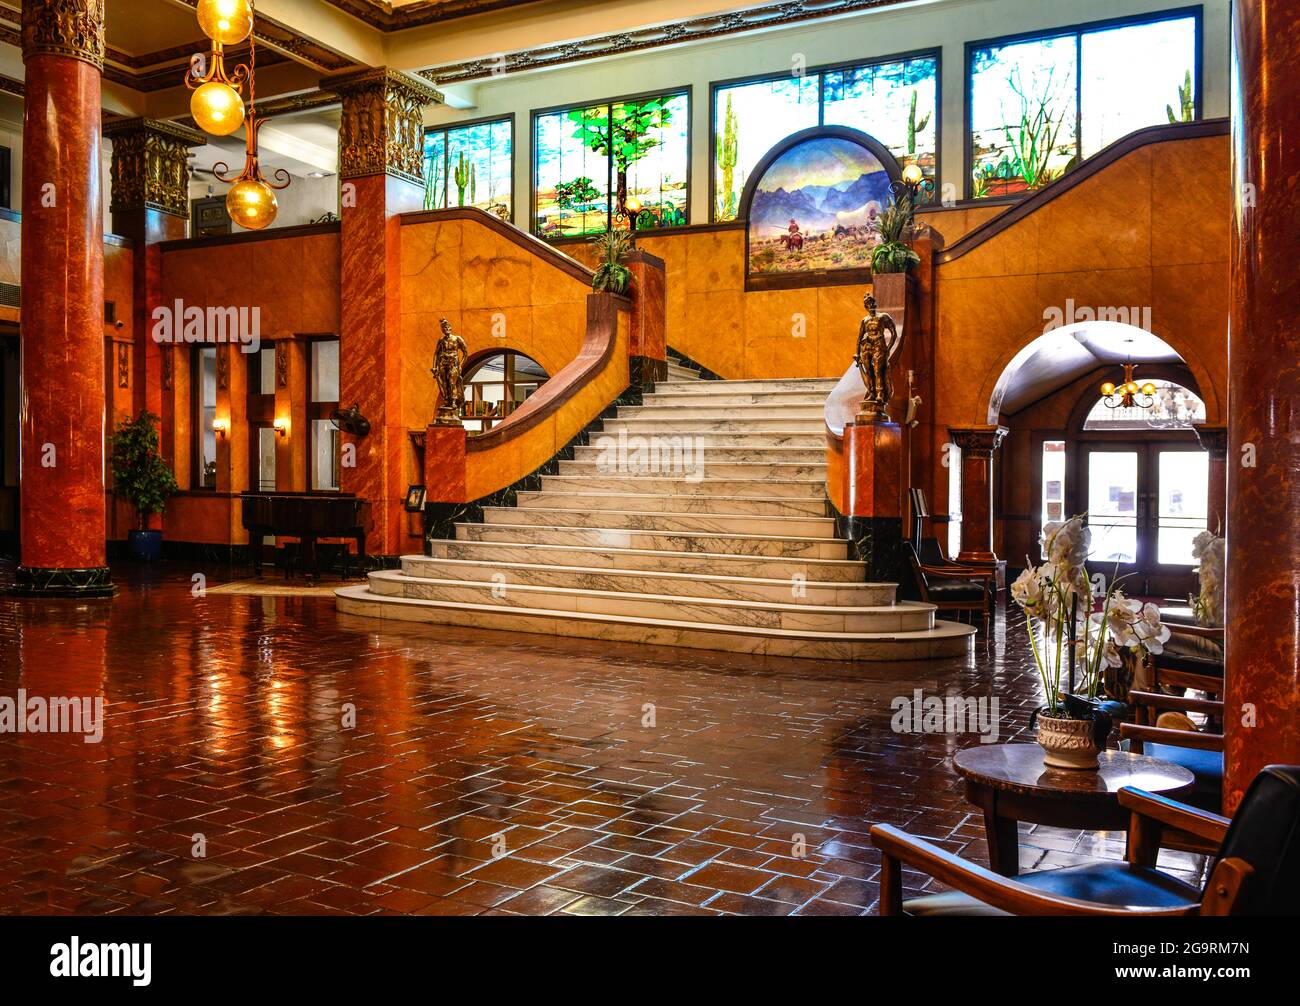 Opened in 1907, the ornate lobby of the storied landmark Gadsden Hotel with it's grand staircase in the Mexican border town of Douglas, AZ, USA Stock Photo